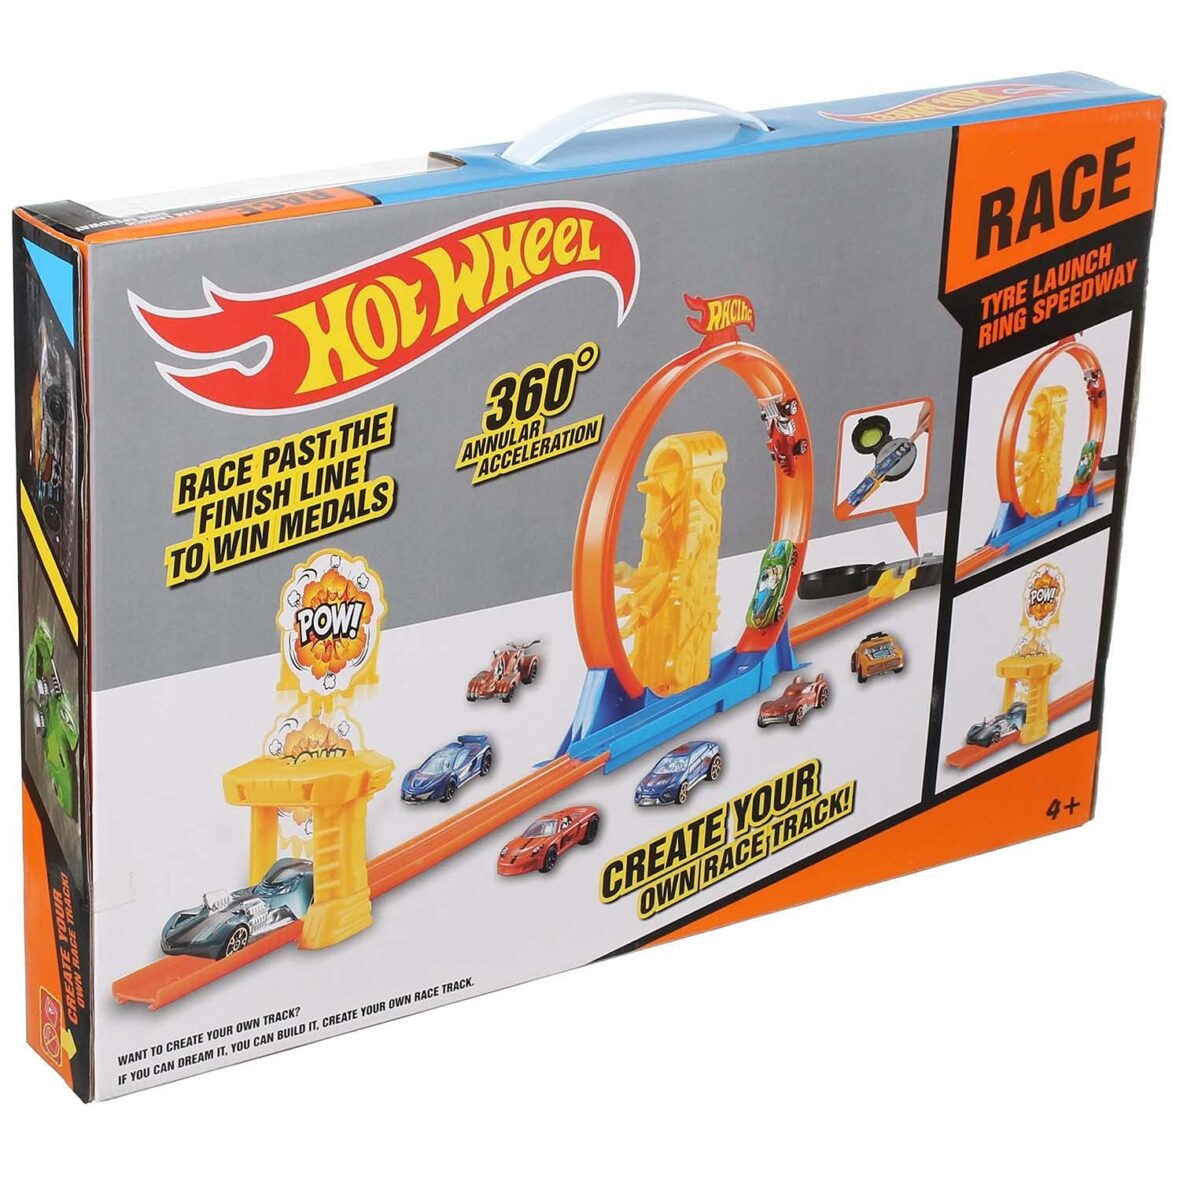 Hot Wheel Metal 360 Degrees Annular Acceleration Race Ring Speedway.2